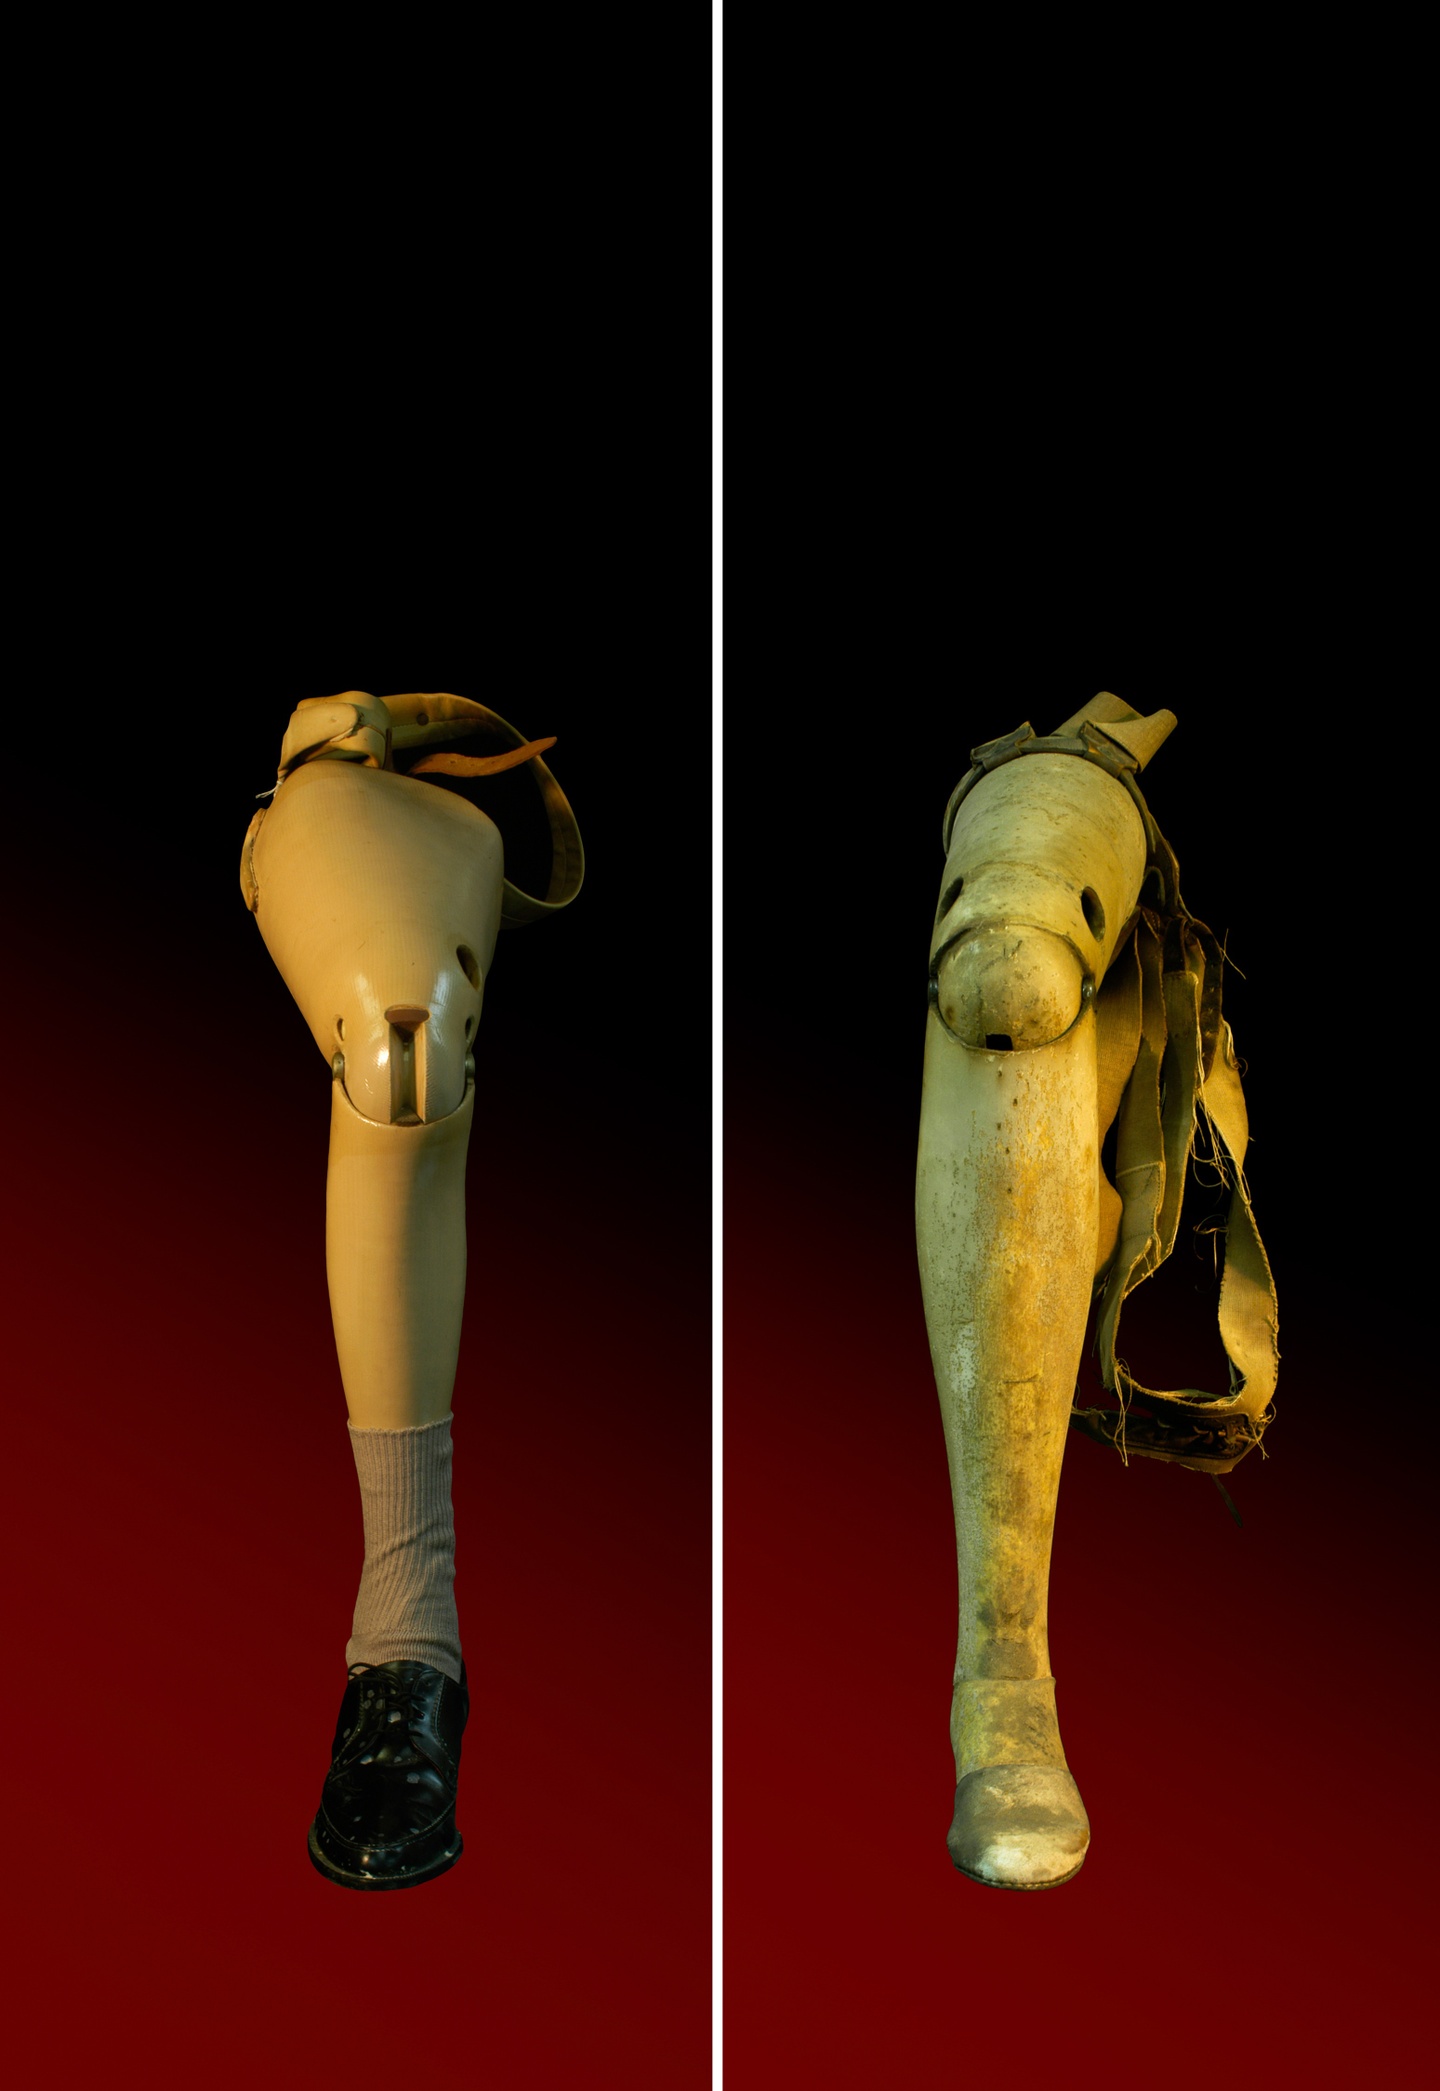 Two images, side by side, of severed/detached, likely bionic (right) legs, illuminated by green-golden ambient light. The background is a red-black gradient. The foot in the image to the left is in a black dress shoe, with long light brown socks. The leg in the image to the right is bare, with some cloth draped across the thigh.